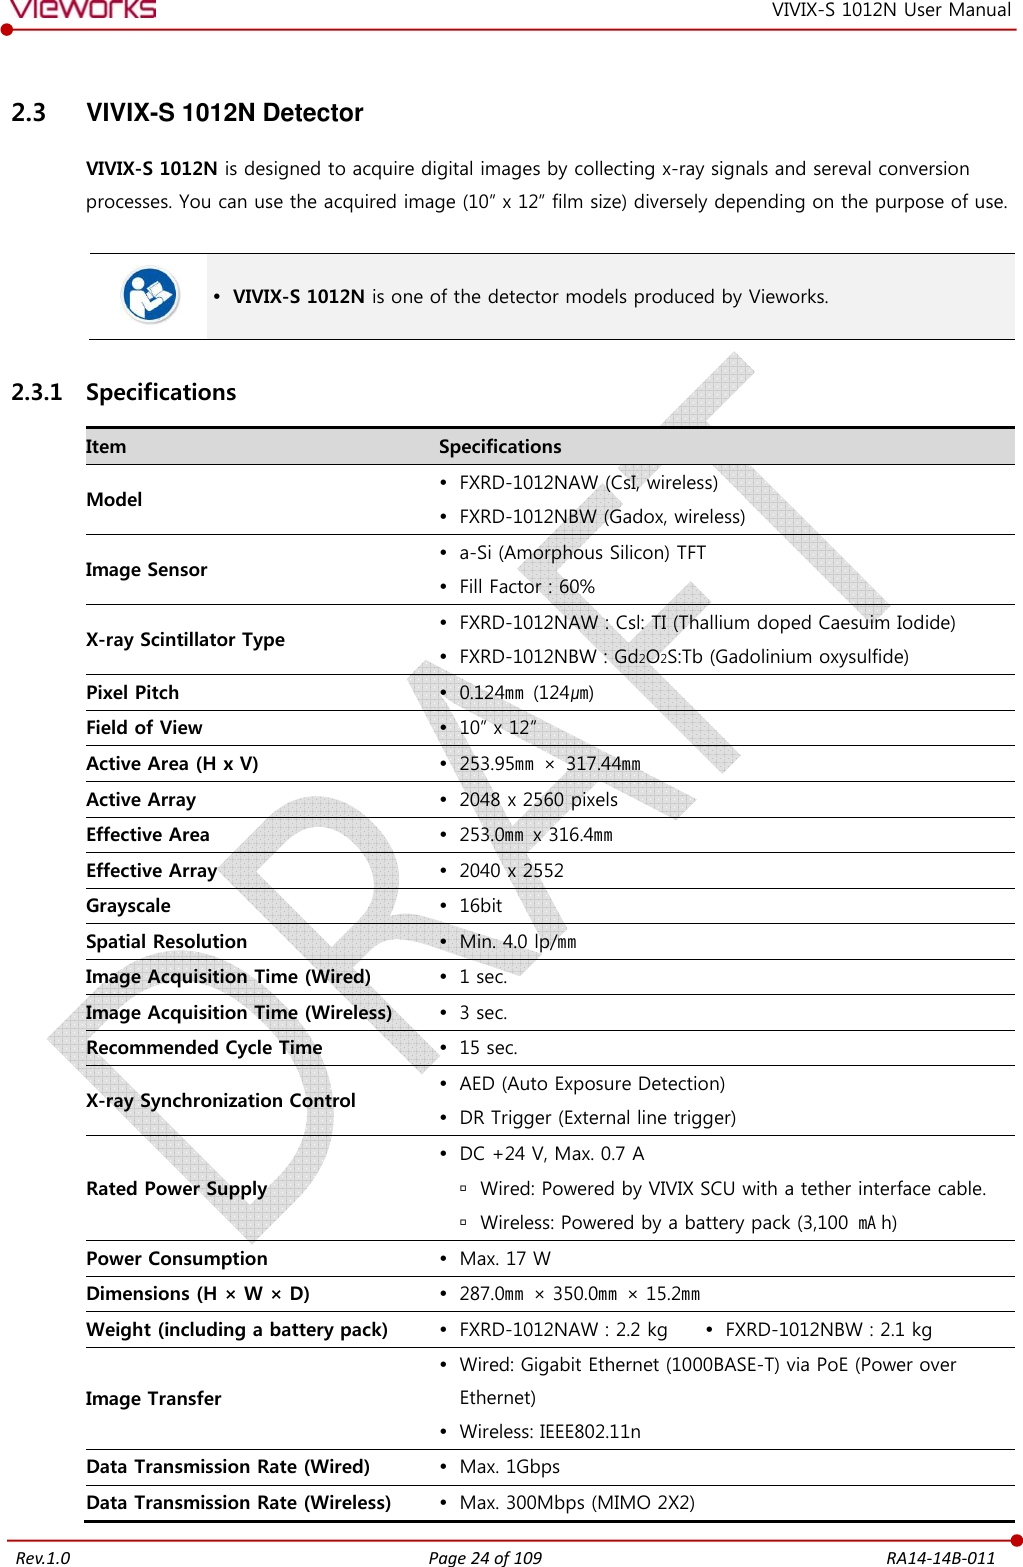   Rev.1.0 Page 24 of 109  RA14-14B-011 VIVIX-S 1012N User Manual 2.3  VIVIX-S 1012N Detector VIVIX-S 1012N is designed to acquire digital images by collecting x-ray signals and sereval conversion processes. You can use the acquired image (10” x 12” film size) diversely depending on the purpose of use.    VIVIX-S 1012N is one of the detector models produced by Vieworks. 2.3.1 Specifications Item  Specifications Model  FXRD-1012NAW (CsI, wireless)  FXRD-1012NBW (Gadox, wireless) Image Sensor  a-Si (Amorphous Silicon) TFT  Fill Factor : 60% X-ray Scintillator Type  FXRD-1012NAW : Csl: TI (Thallium doped Caesuim Iodide)  FXRD-1012NBW : Gd2O2S:Tb (Gadolinium oxysulfide) Pixel Pitch   0.124㎜  (124㎛) Field of View   10” x 12” Active Area (H x V)   253.95㎜ ×  317.44㎜ Active Array   2048 x 2560 pixels Effective Area   253.0㎜  x 316.4㎜ Effective Array   2040 x 2552 Grayscale   16bit Spatial Resolution   Min. 4.0 lp/㎜ Image Acquisition Time (Wired)   1 sec. Image Acquisition Time (Wireless)   3 sec. Recommended Cycle Time   15 sec. X-ray Synchronization Control  AED (Auto Exposure Detection)  DR Trigger (External line trigger) Rated Power Supply  DC +24 V, Max. 0.7 A  Wired: Powered by VIVIX SCU with a tether interface cable.  Wireless: Powered by a battery pack (3,100  ㎃ h) Power Consumption   Max. 17 W Dimensions (H × W × D)   287.0㎜  × 350.0㎜  × 15.2㎜ Weight (including a battery pack)   FXRD-1012NAW : 2.2 kg     FXRD-1012NBW : 2.1 kg Image Transfer  Wired: Gigabit Ethernet (1000BASE-T) via PoE (Power over Ethernet)  Wireless: IEEE802.11n Data Transmission Rate (Wired)   Max. 1Gbps Data Transmission Rate (Wireless)   Max. 300Mbps (MIMO 2X2) 